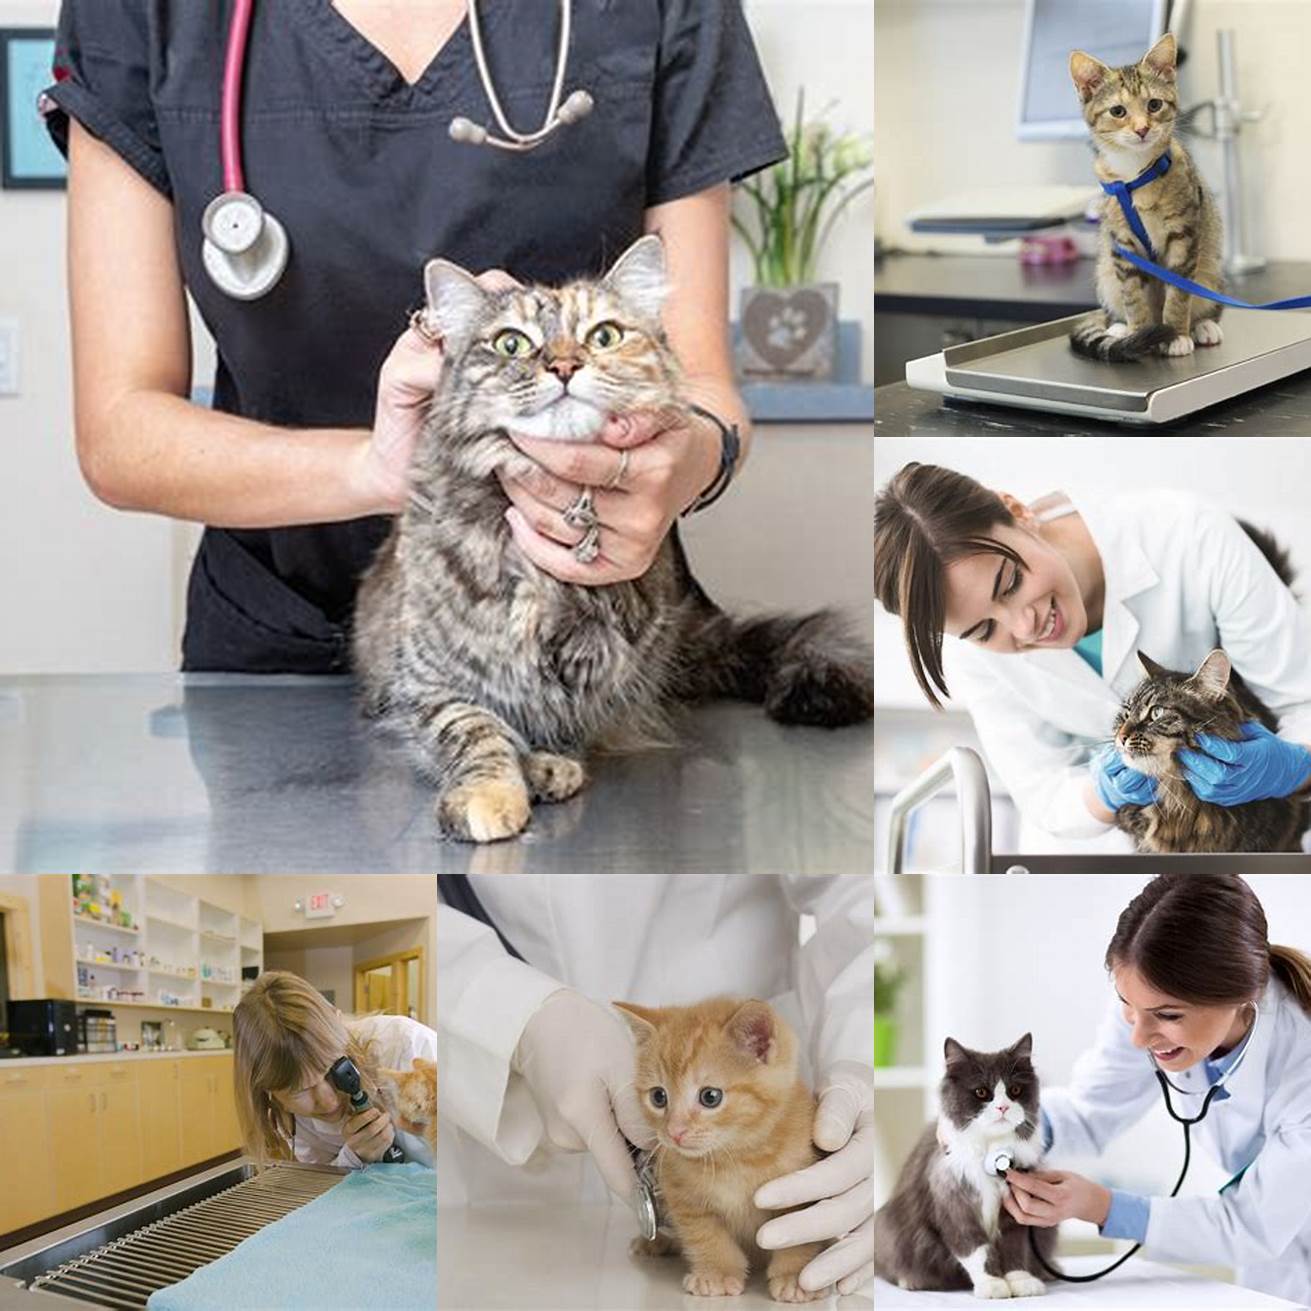 Do not try to diagnose or treat the problem on your own without consulting a veterinarian